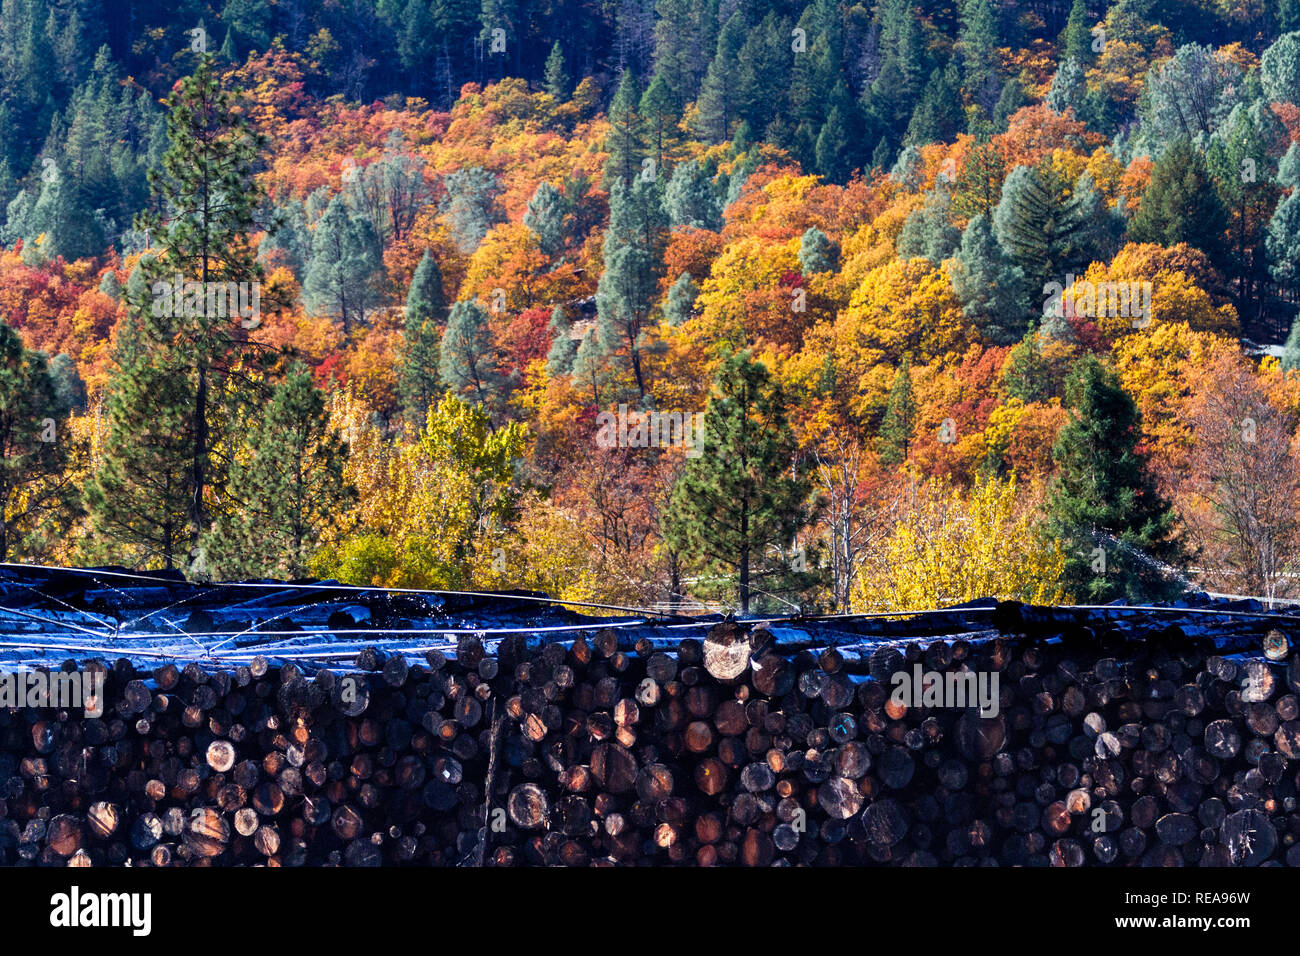 Before & After - Autumn forest provides a colorful backdrop to a lumber mill log pile. Weaverville, California, USA Stock Photo